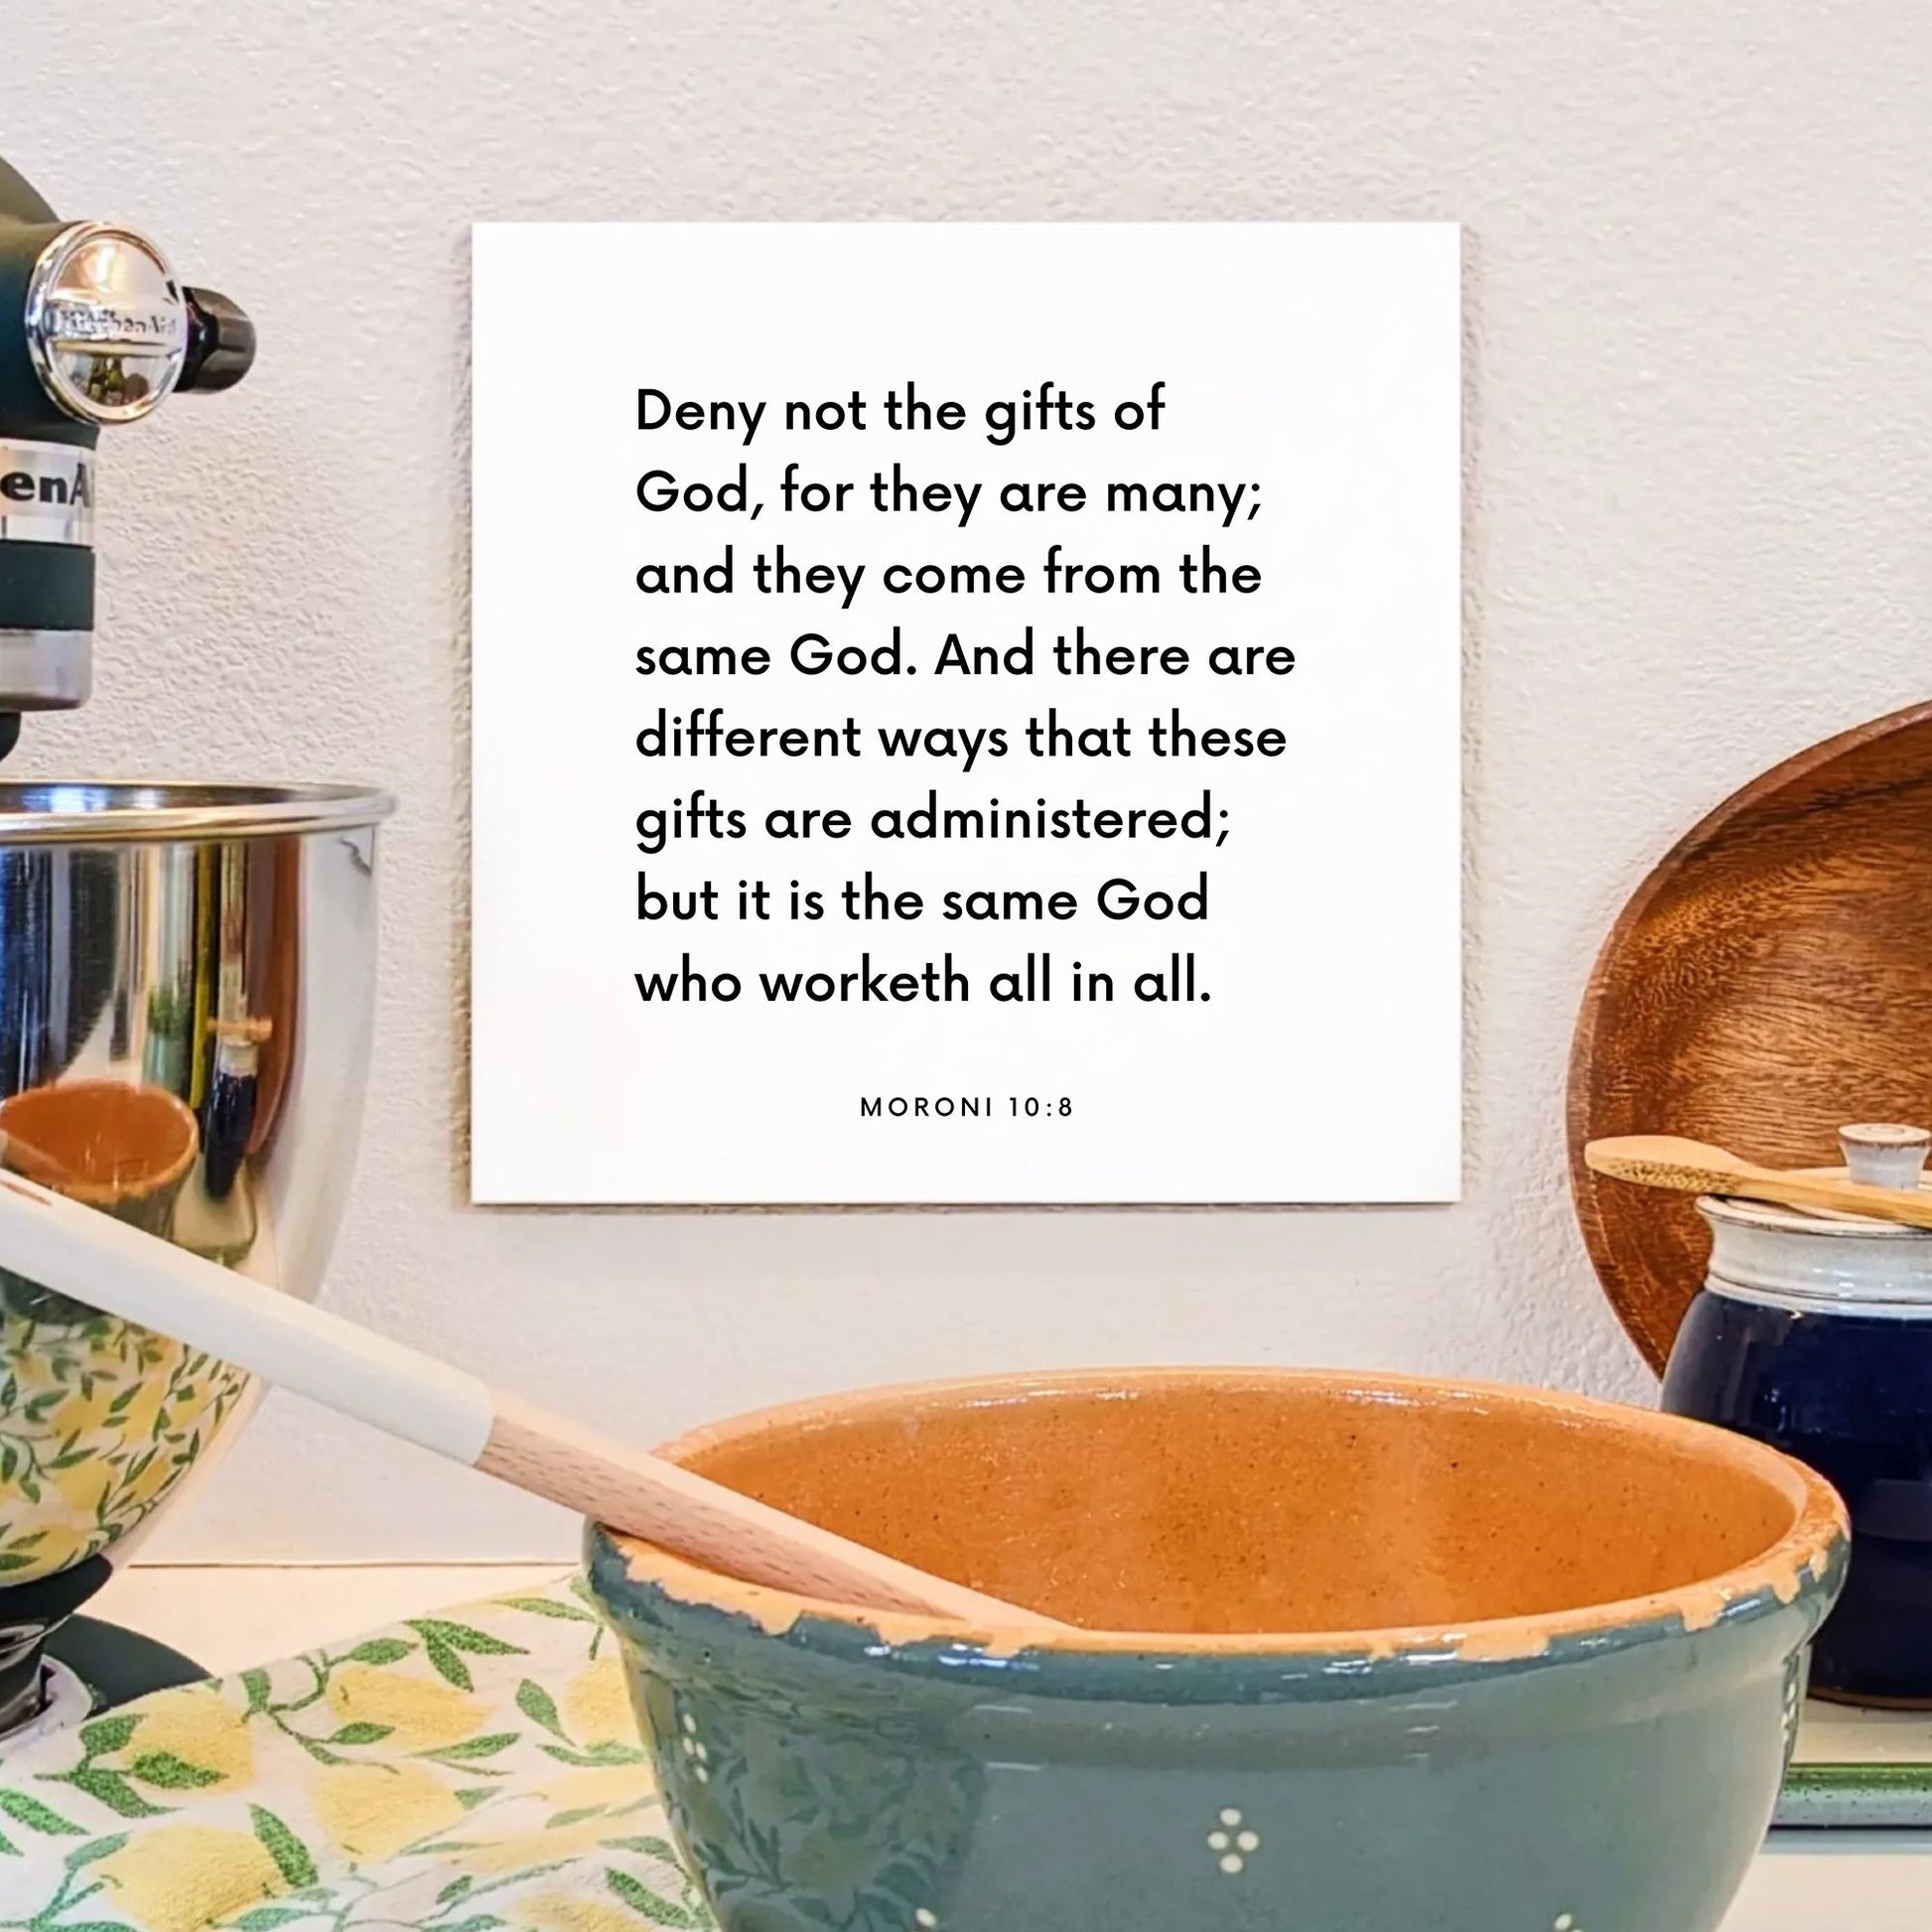 Kitchen mouting of the scripture tile for Moroni 10:8 - "Deny not the gifts of God, for they are many"